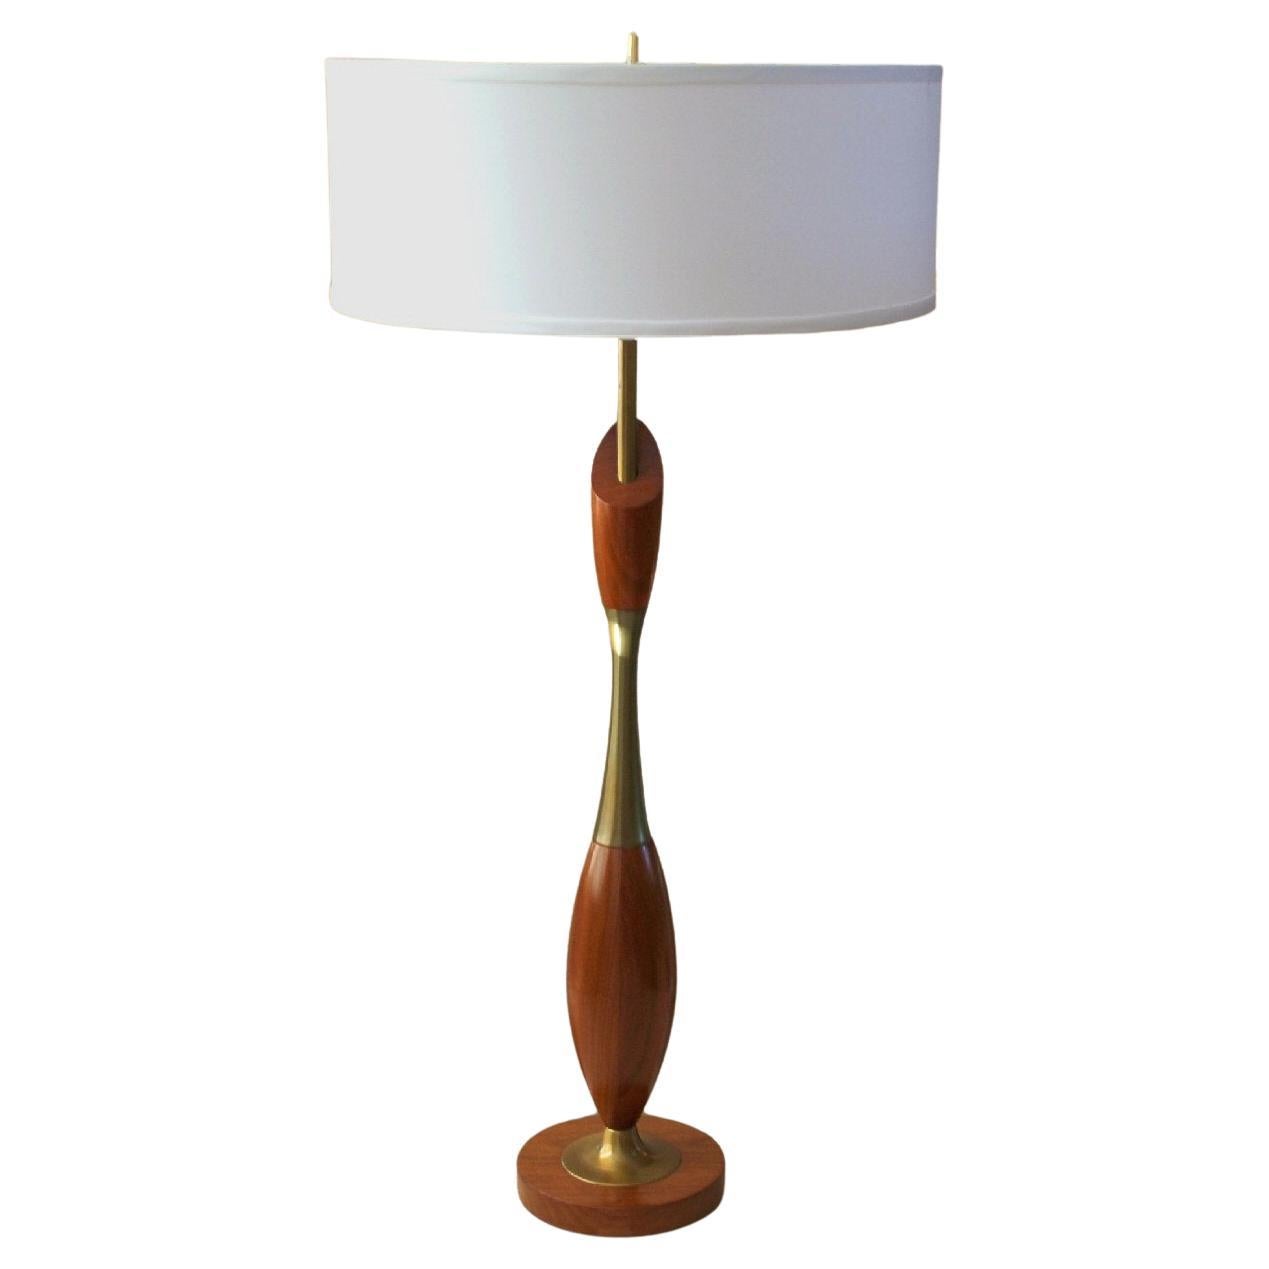 Magnificent Modeline Mid Century Danish Modern Rosewood Table Lamp 1958 Pearsall For Sale